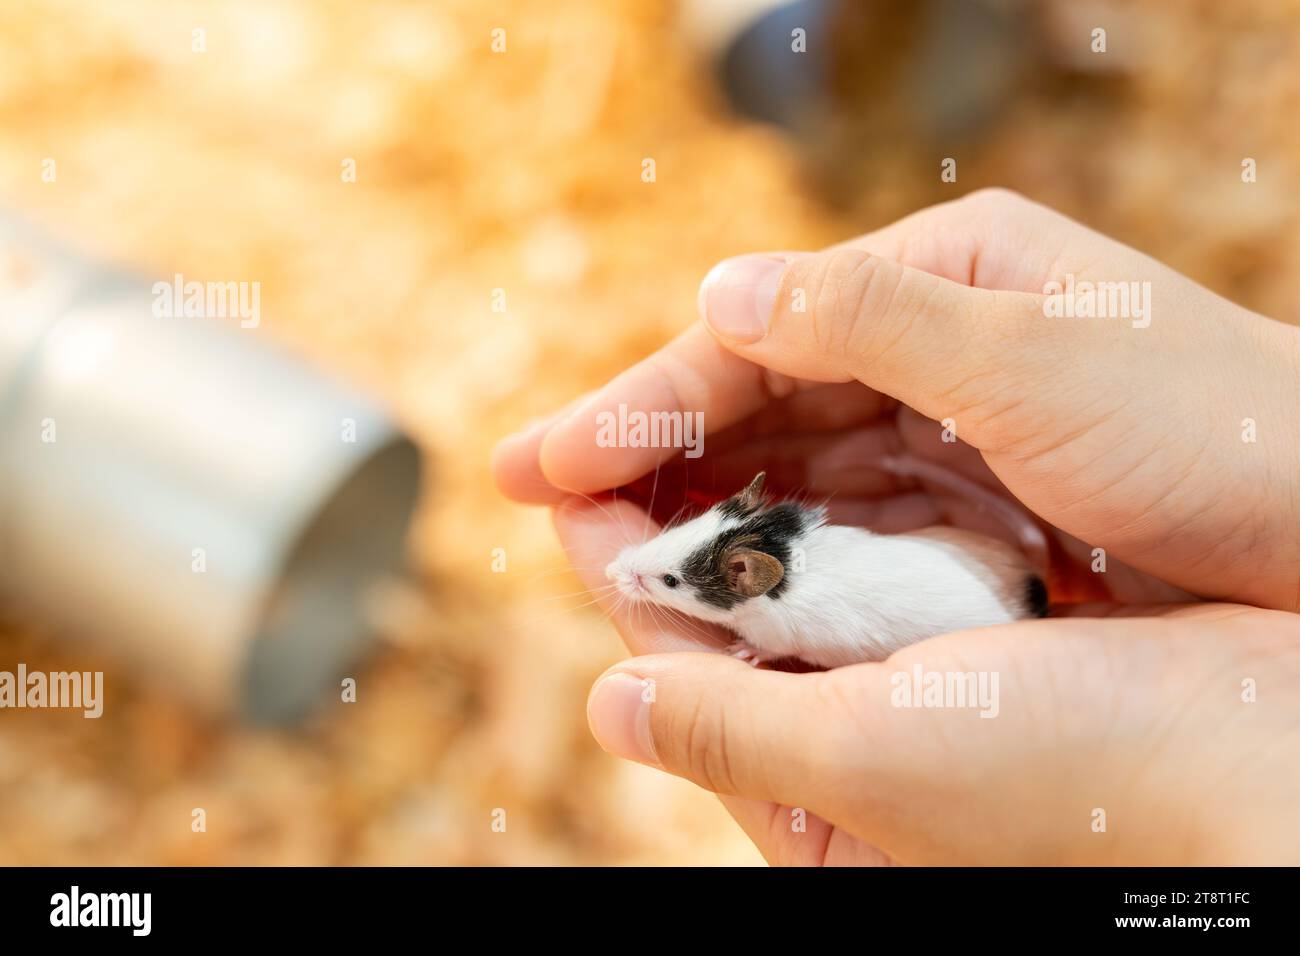 Child's hands holding a small mouse Stock Photo